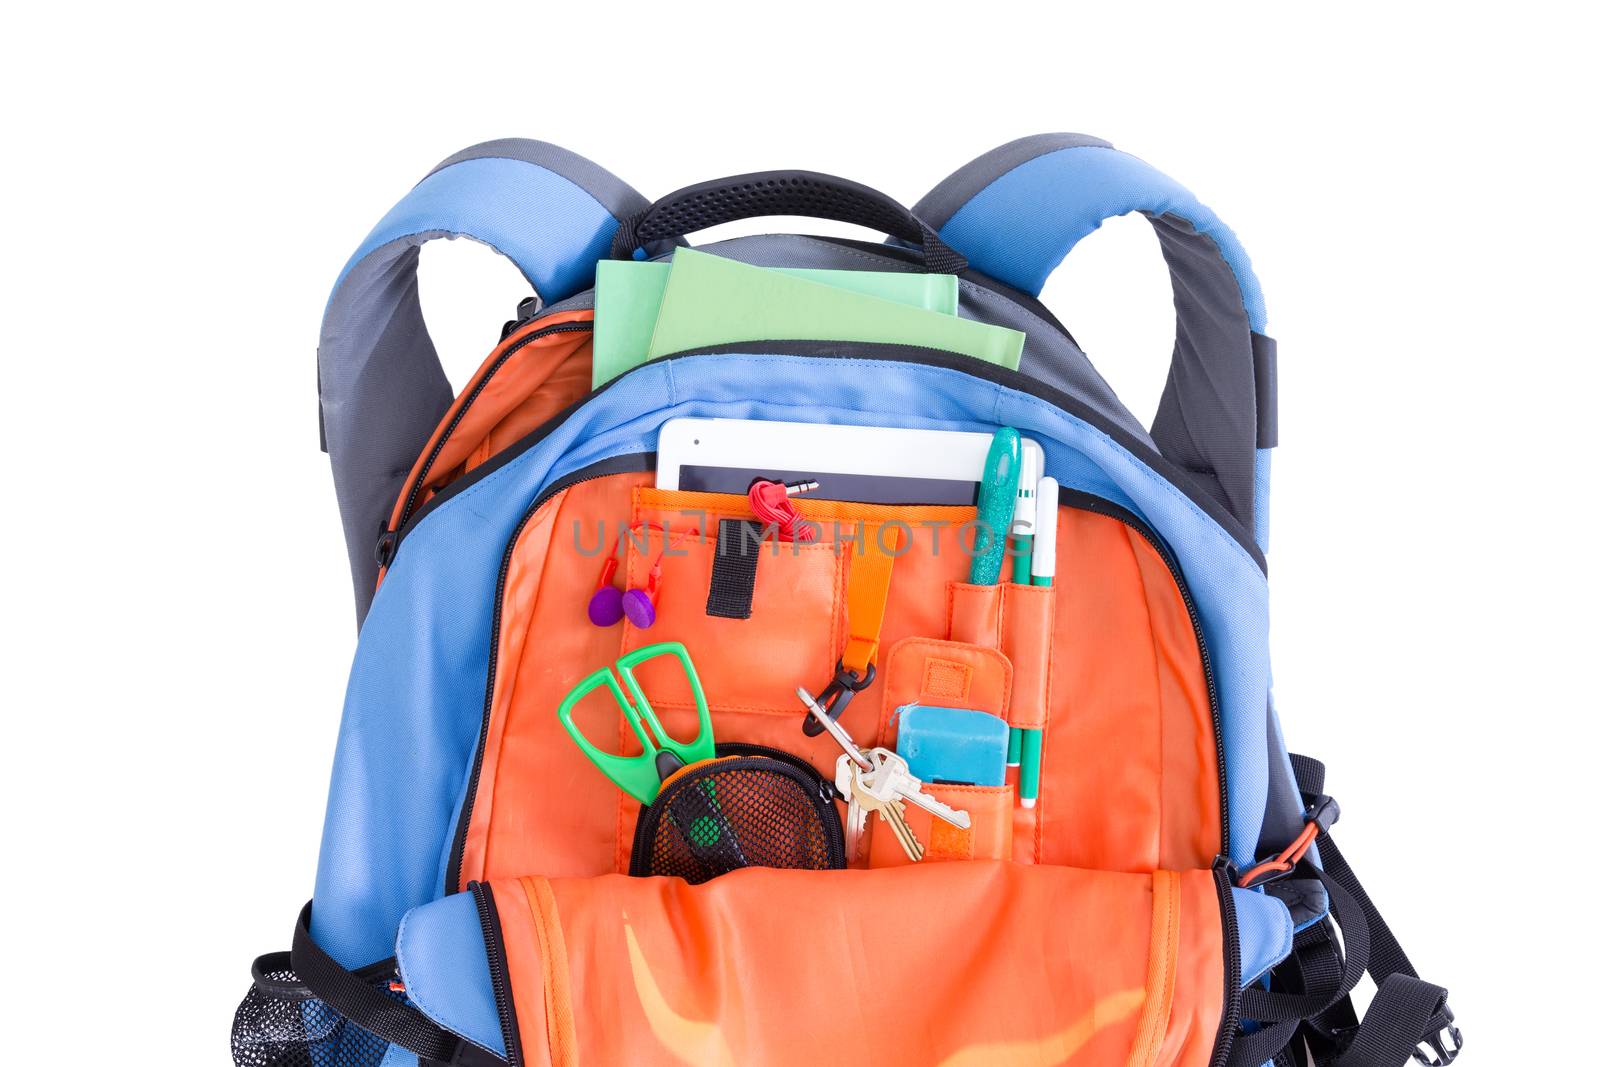 Orange and blue kids school backpack packed with a tablet, notebooks, scissors, pens, books, and stationery ready for a creative art class in an educational concept, on white